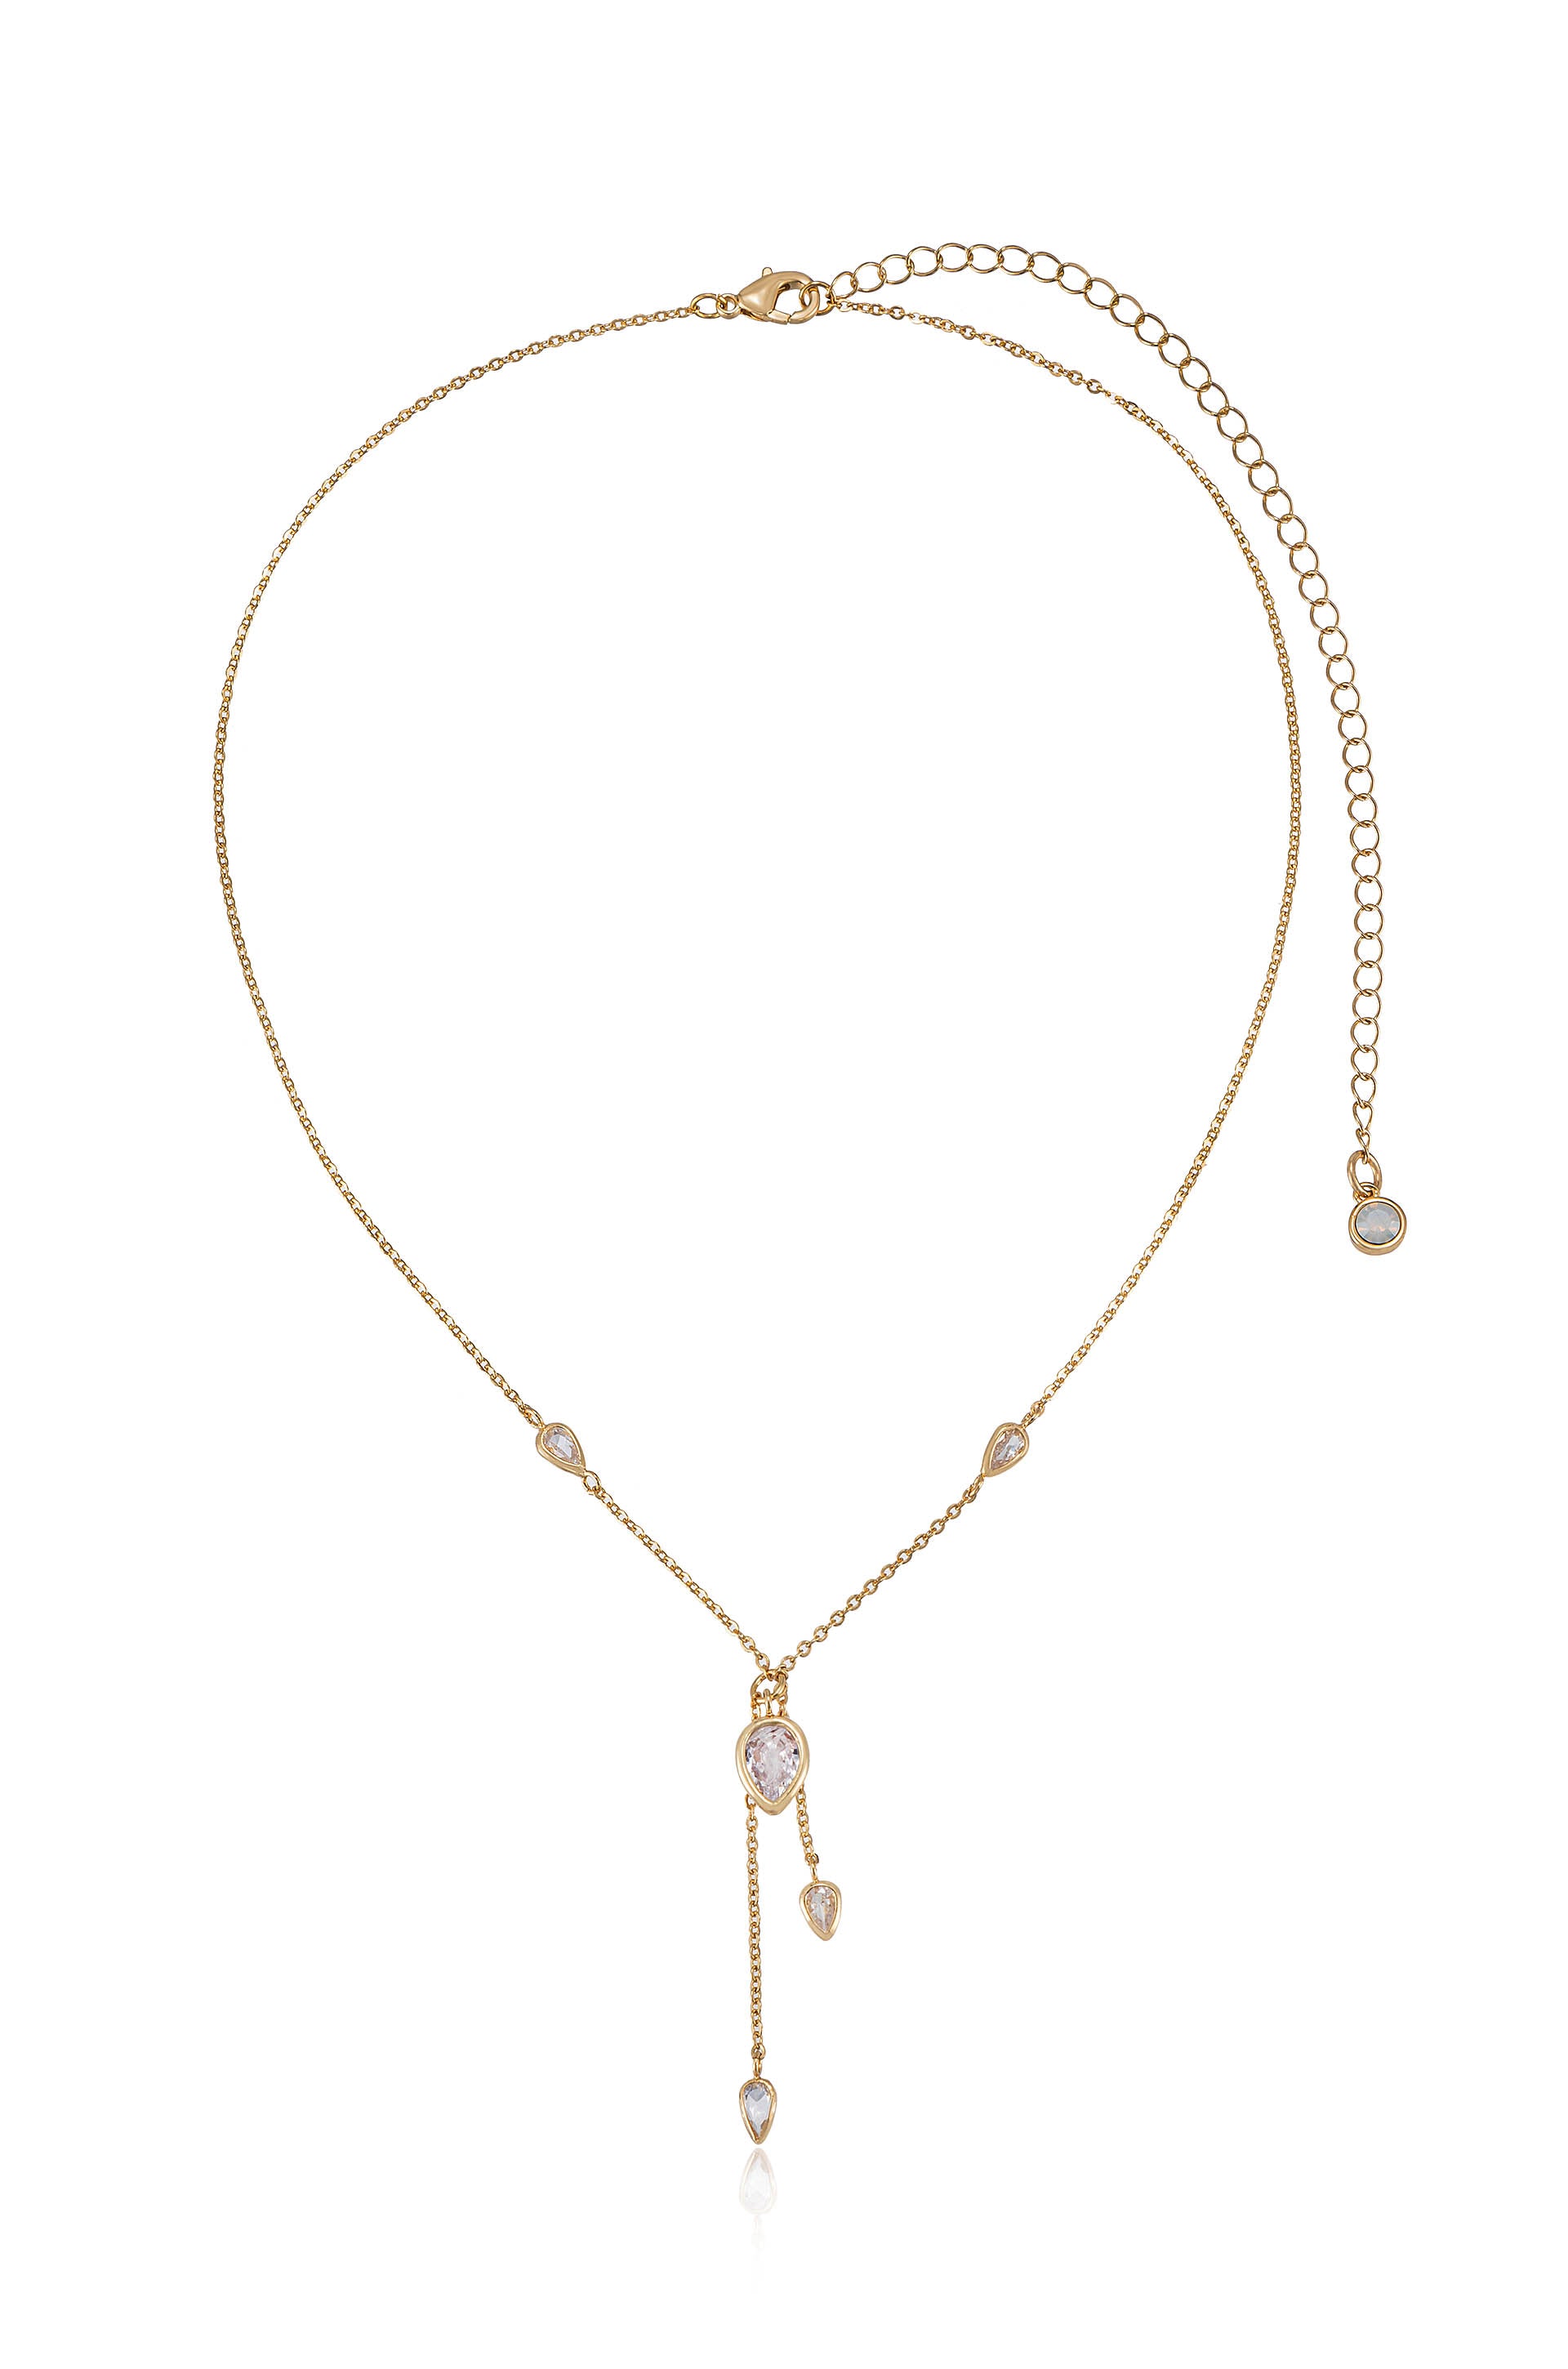 Dangling Bezel Crystal Chain 18k Gold Plated Lariat Necklace full